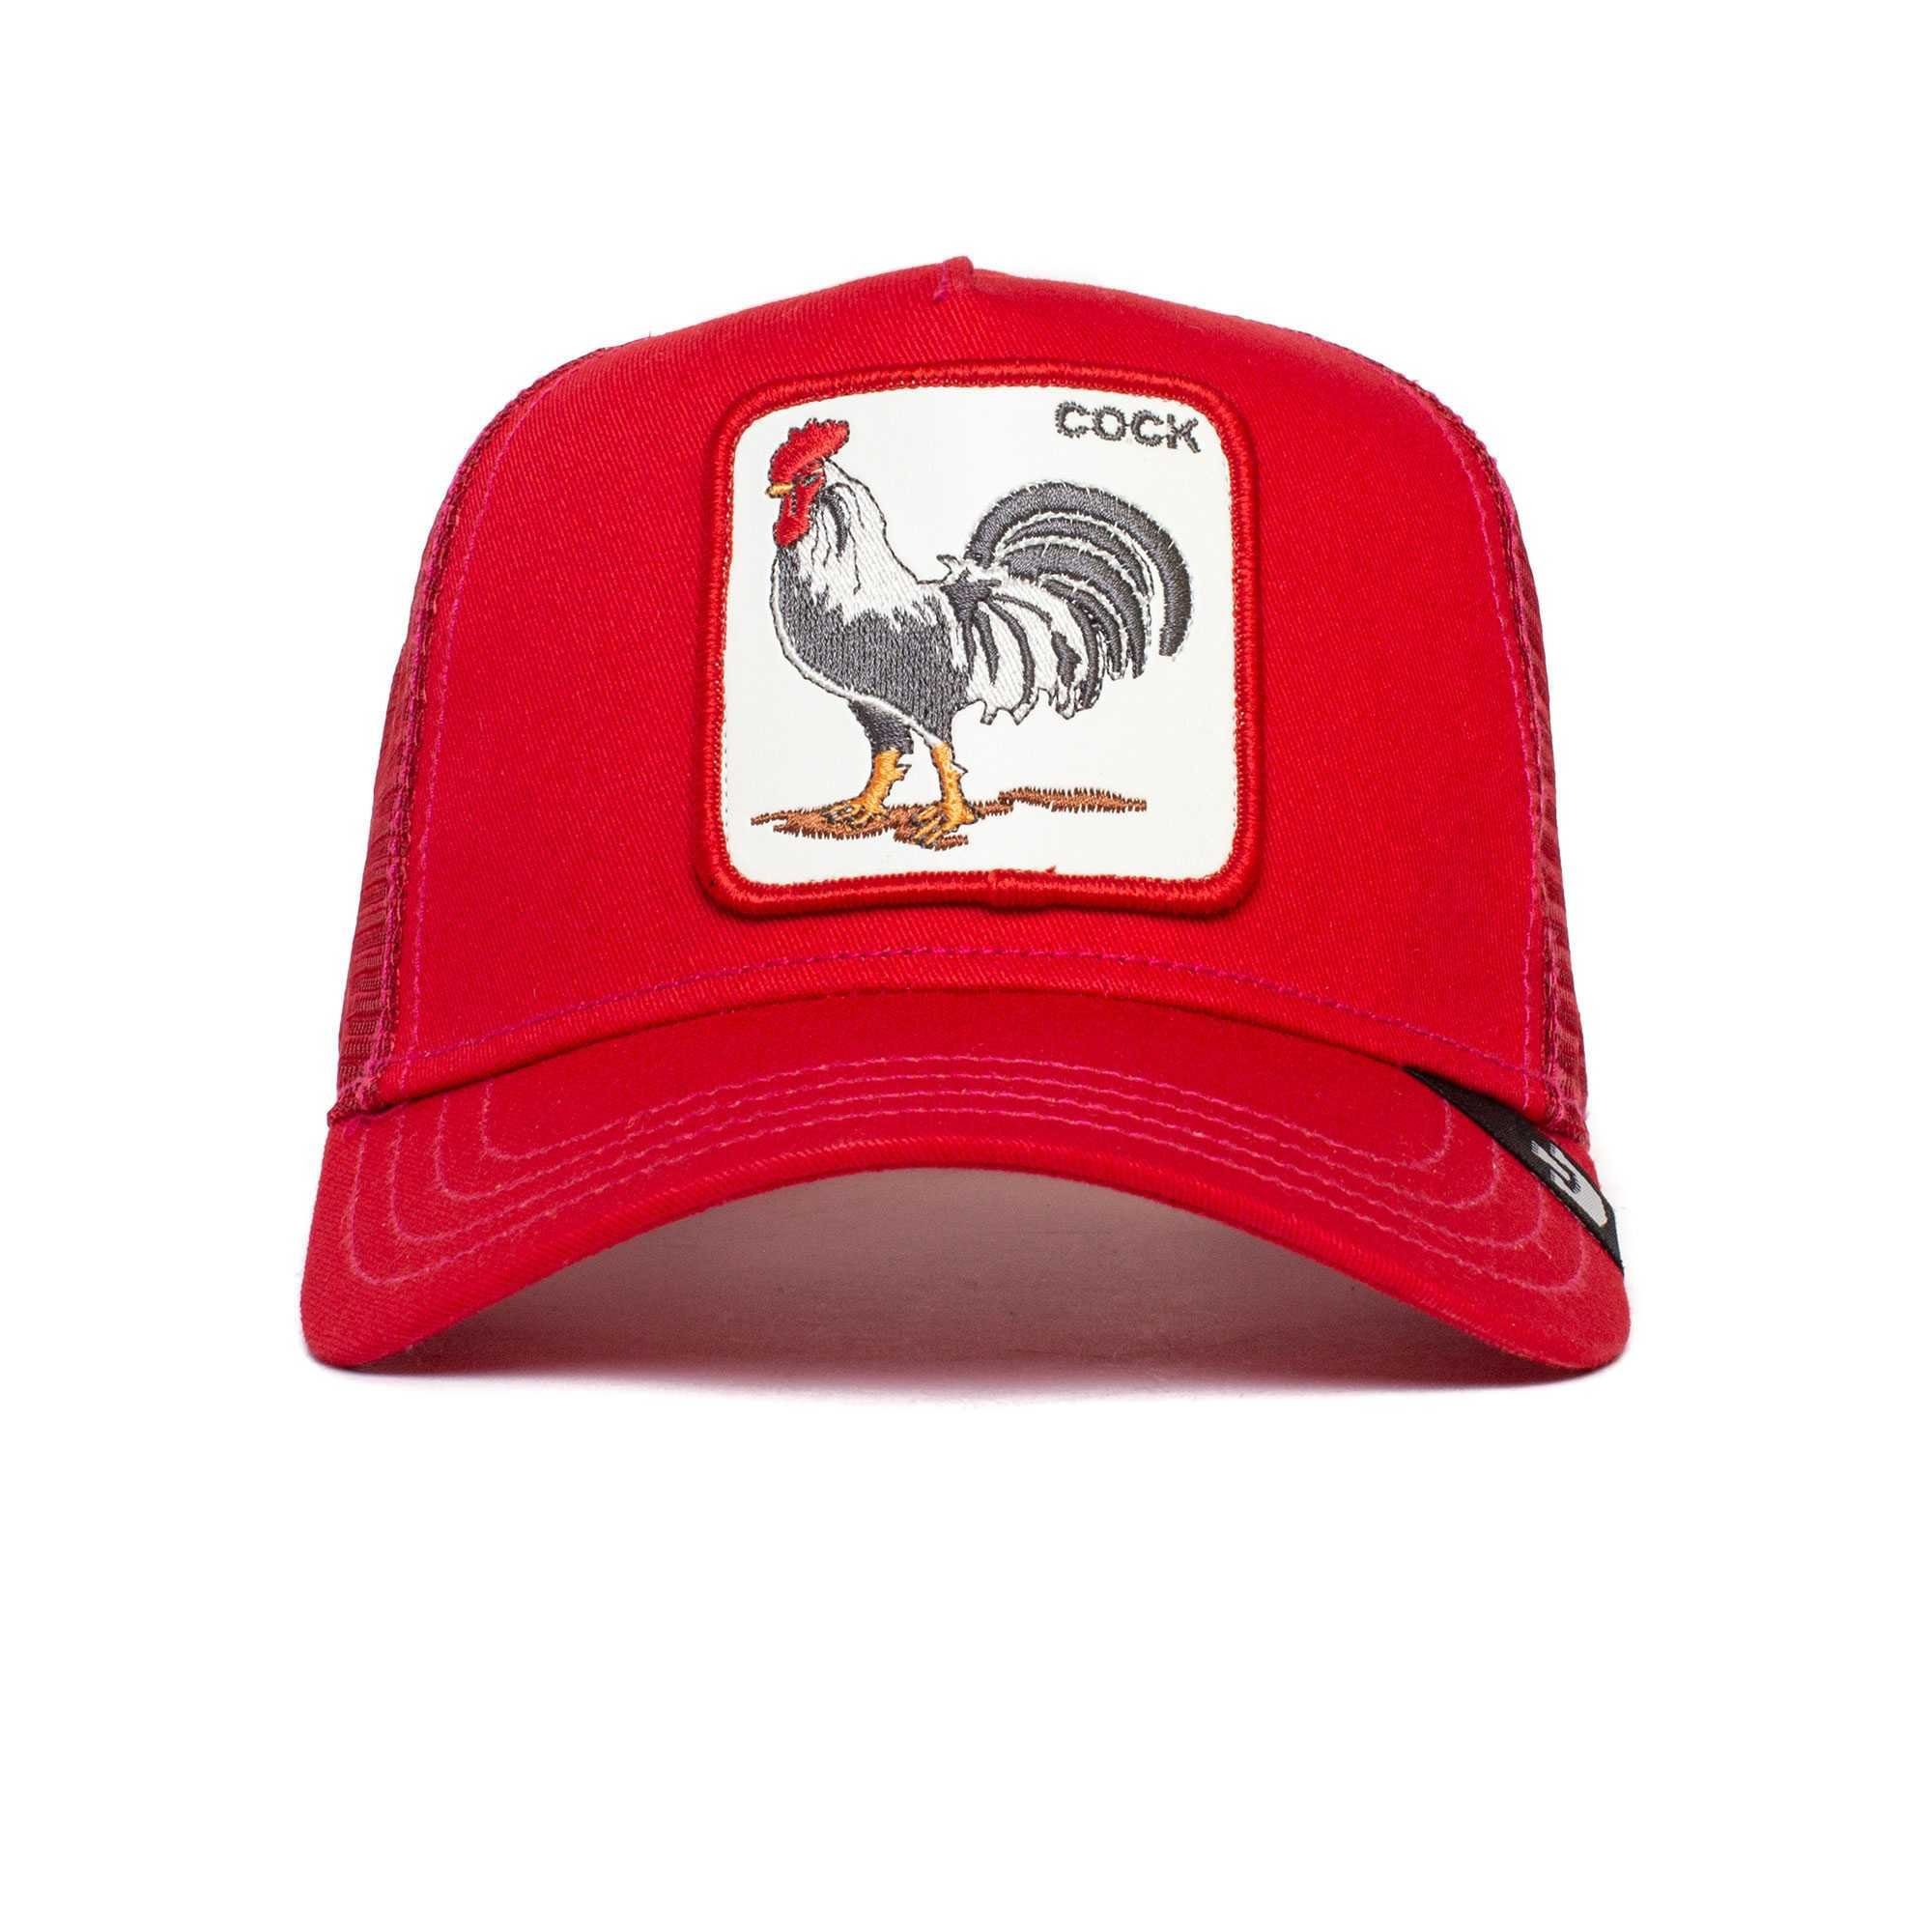 GOORIN Bros. Trucker Size One - Cock Cap Frontpatch, Baseball red Unisex Kappe, Cap The